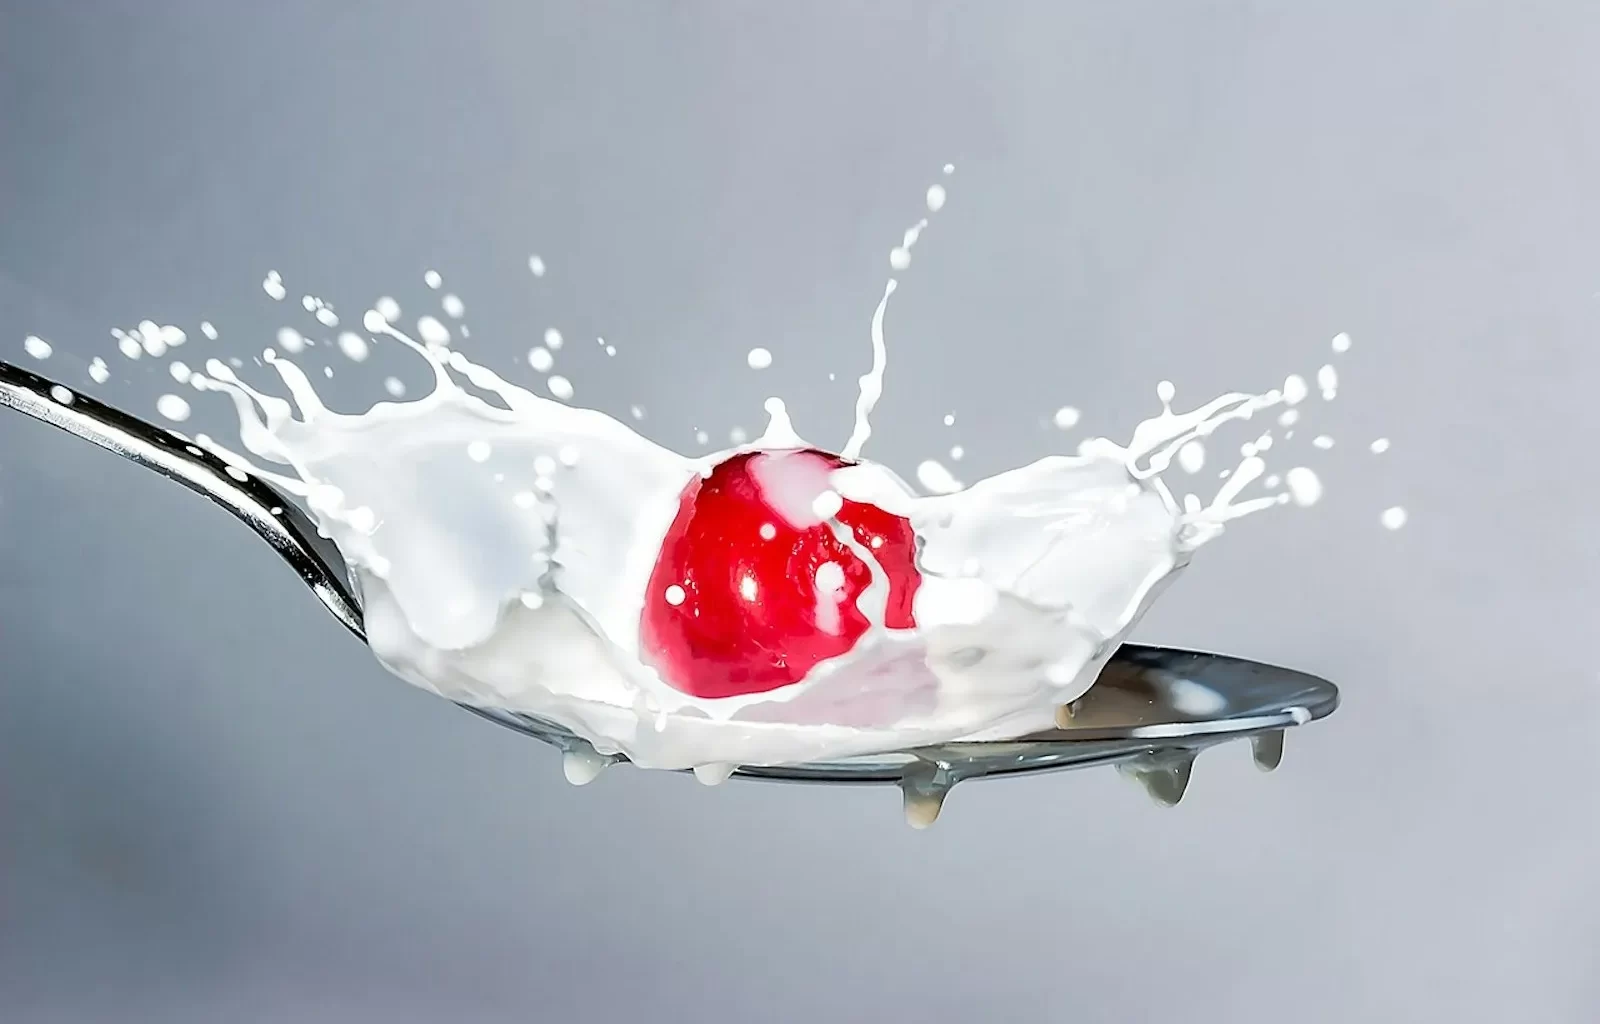 Milk splashing onto a spoon topped with a cherry.Entranced by their gaze, lost in a world of unparalleled beauty and emotion, words inadequate to convey the depth of feeling.